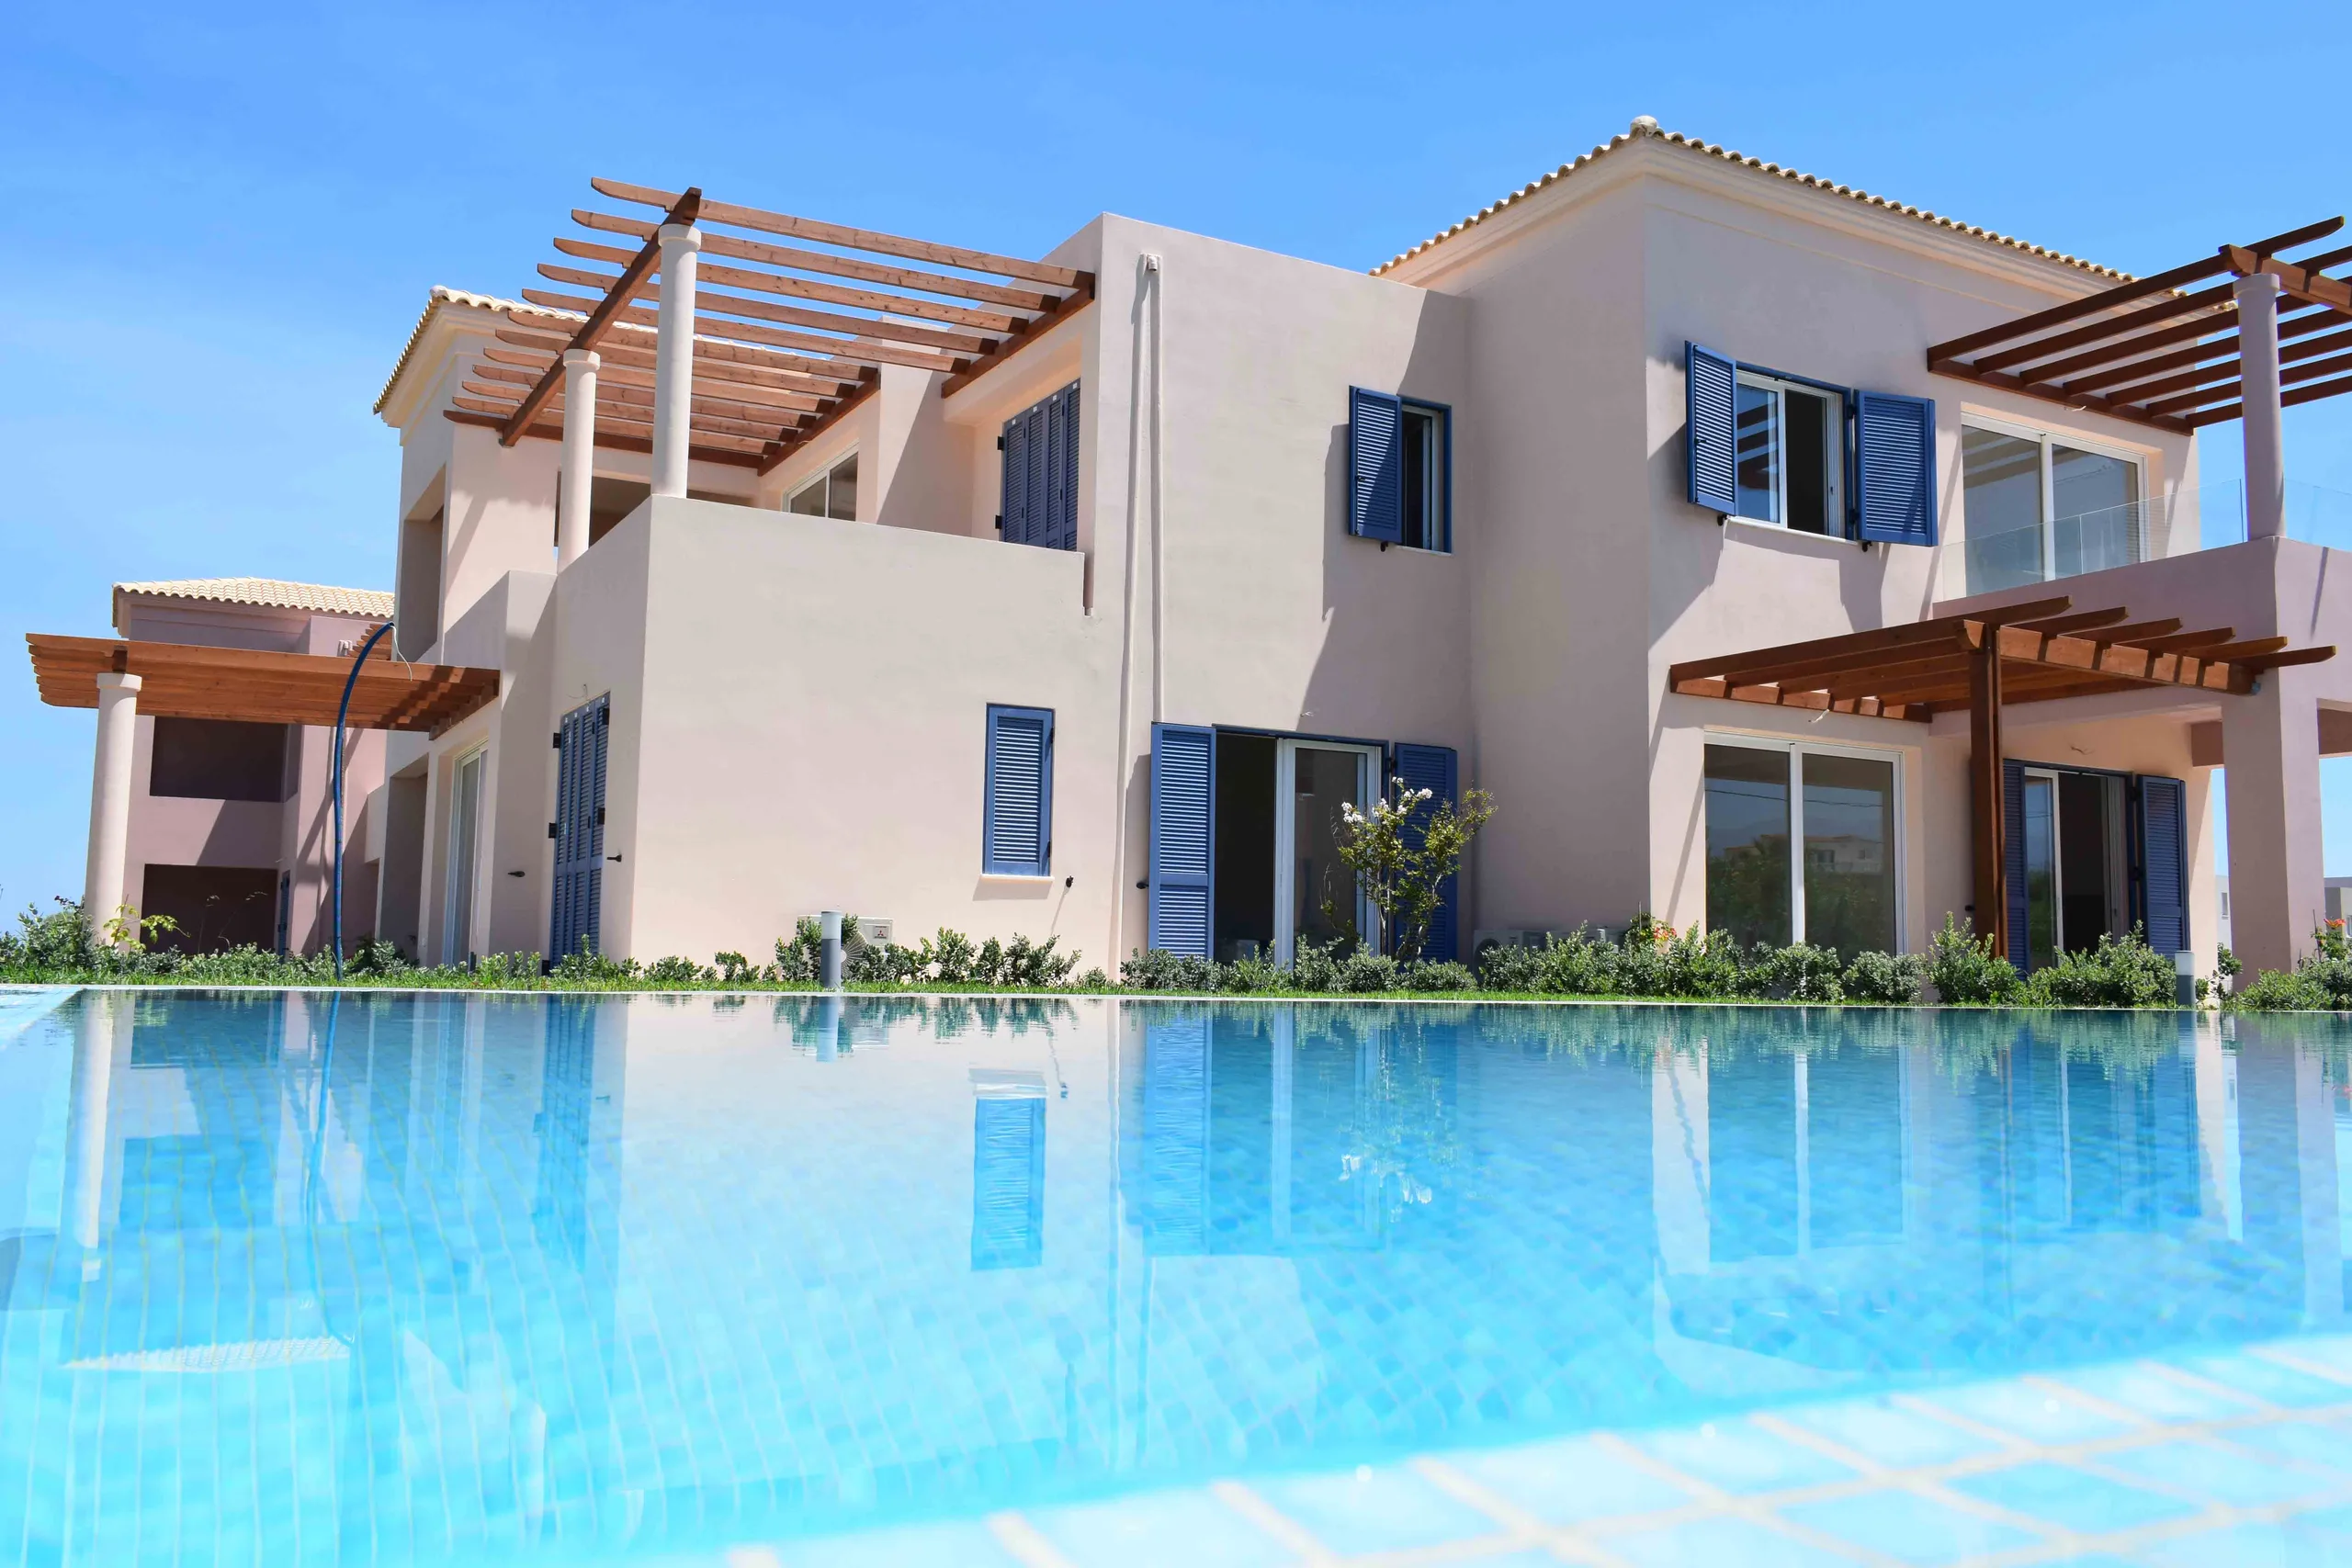 Acropolis Homes - Aegean Blue Apartments - Real Estate Agency - Property Photo - Swimming Pool